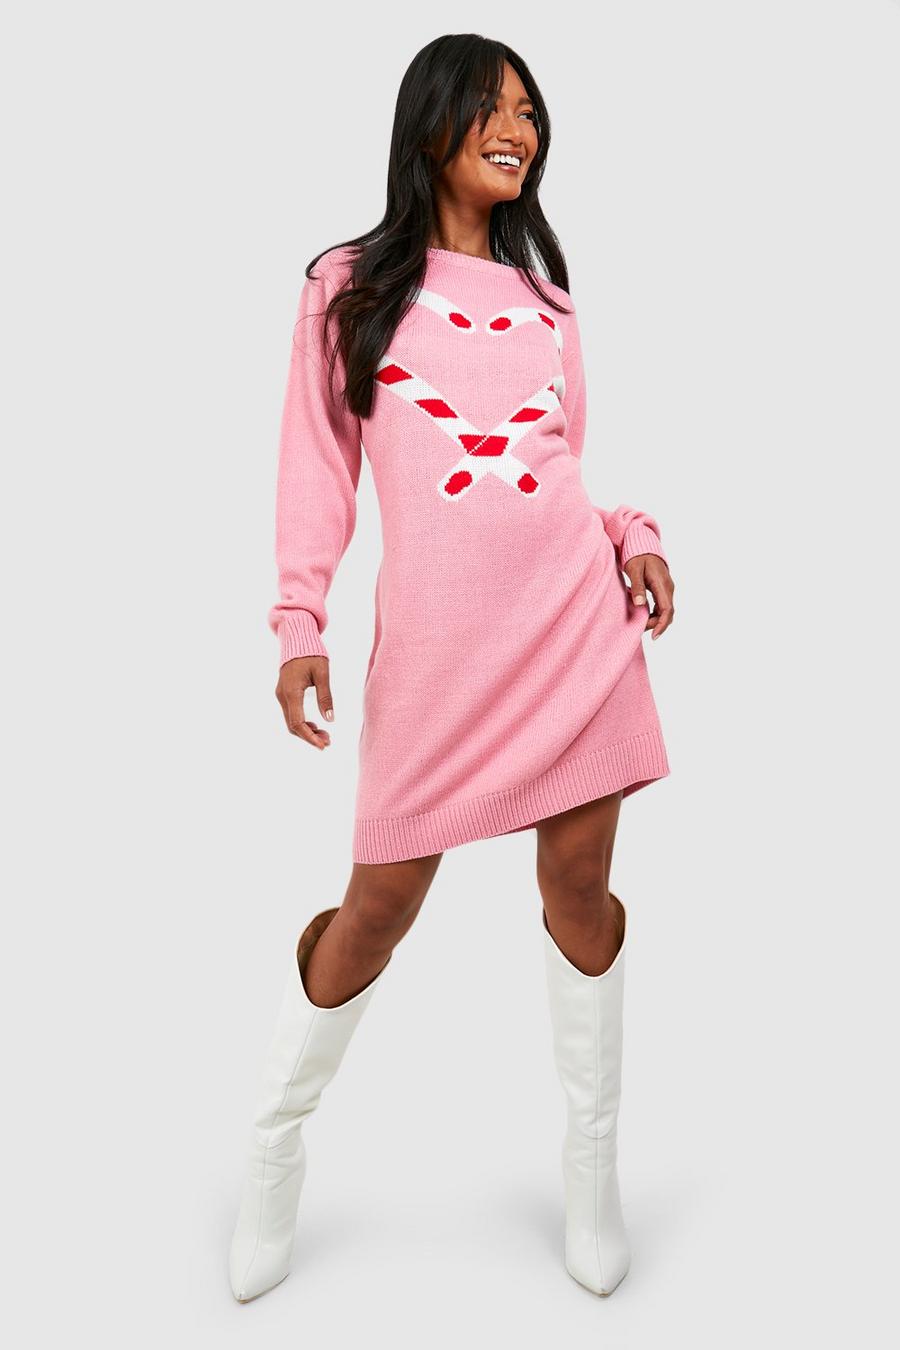 Pink rosa Candy Cane Christmas Jumper Dress